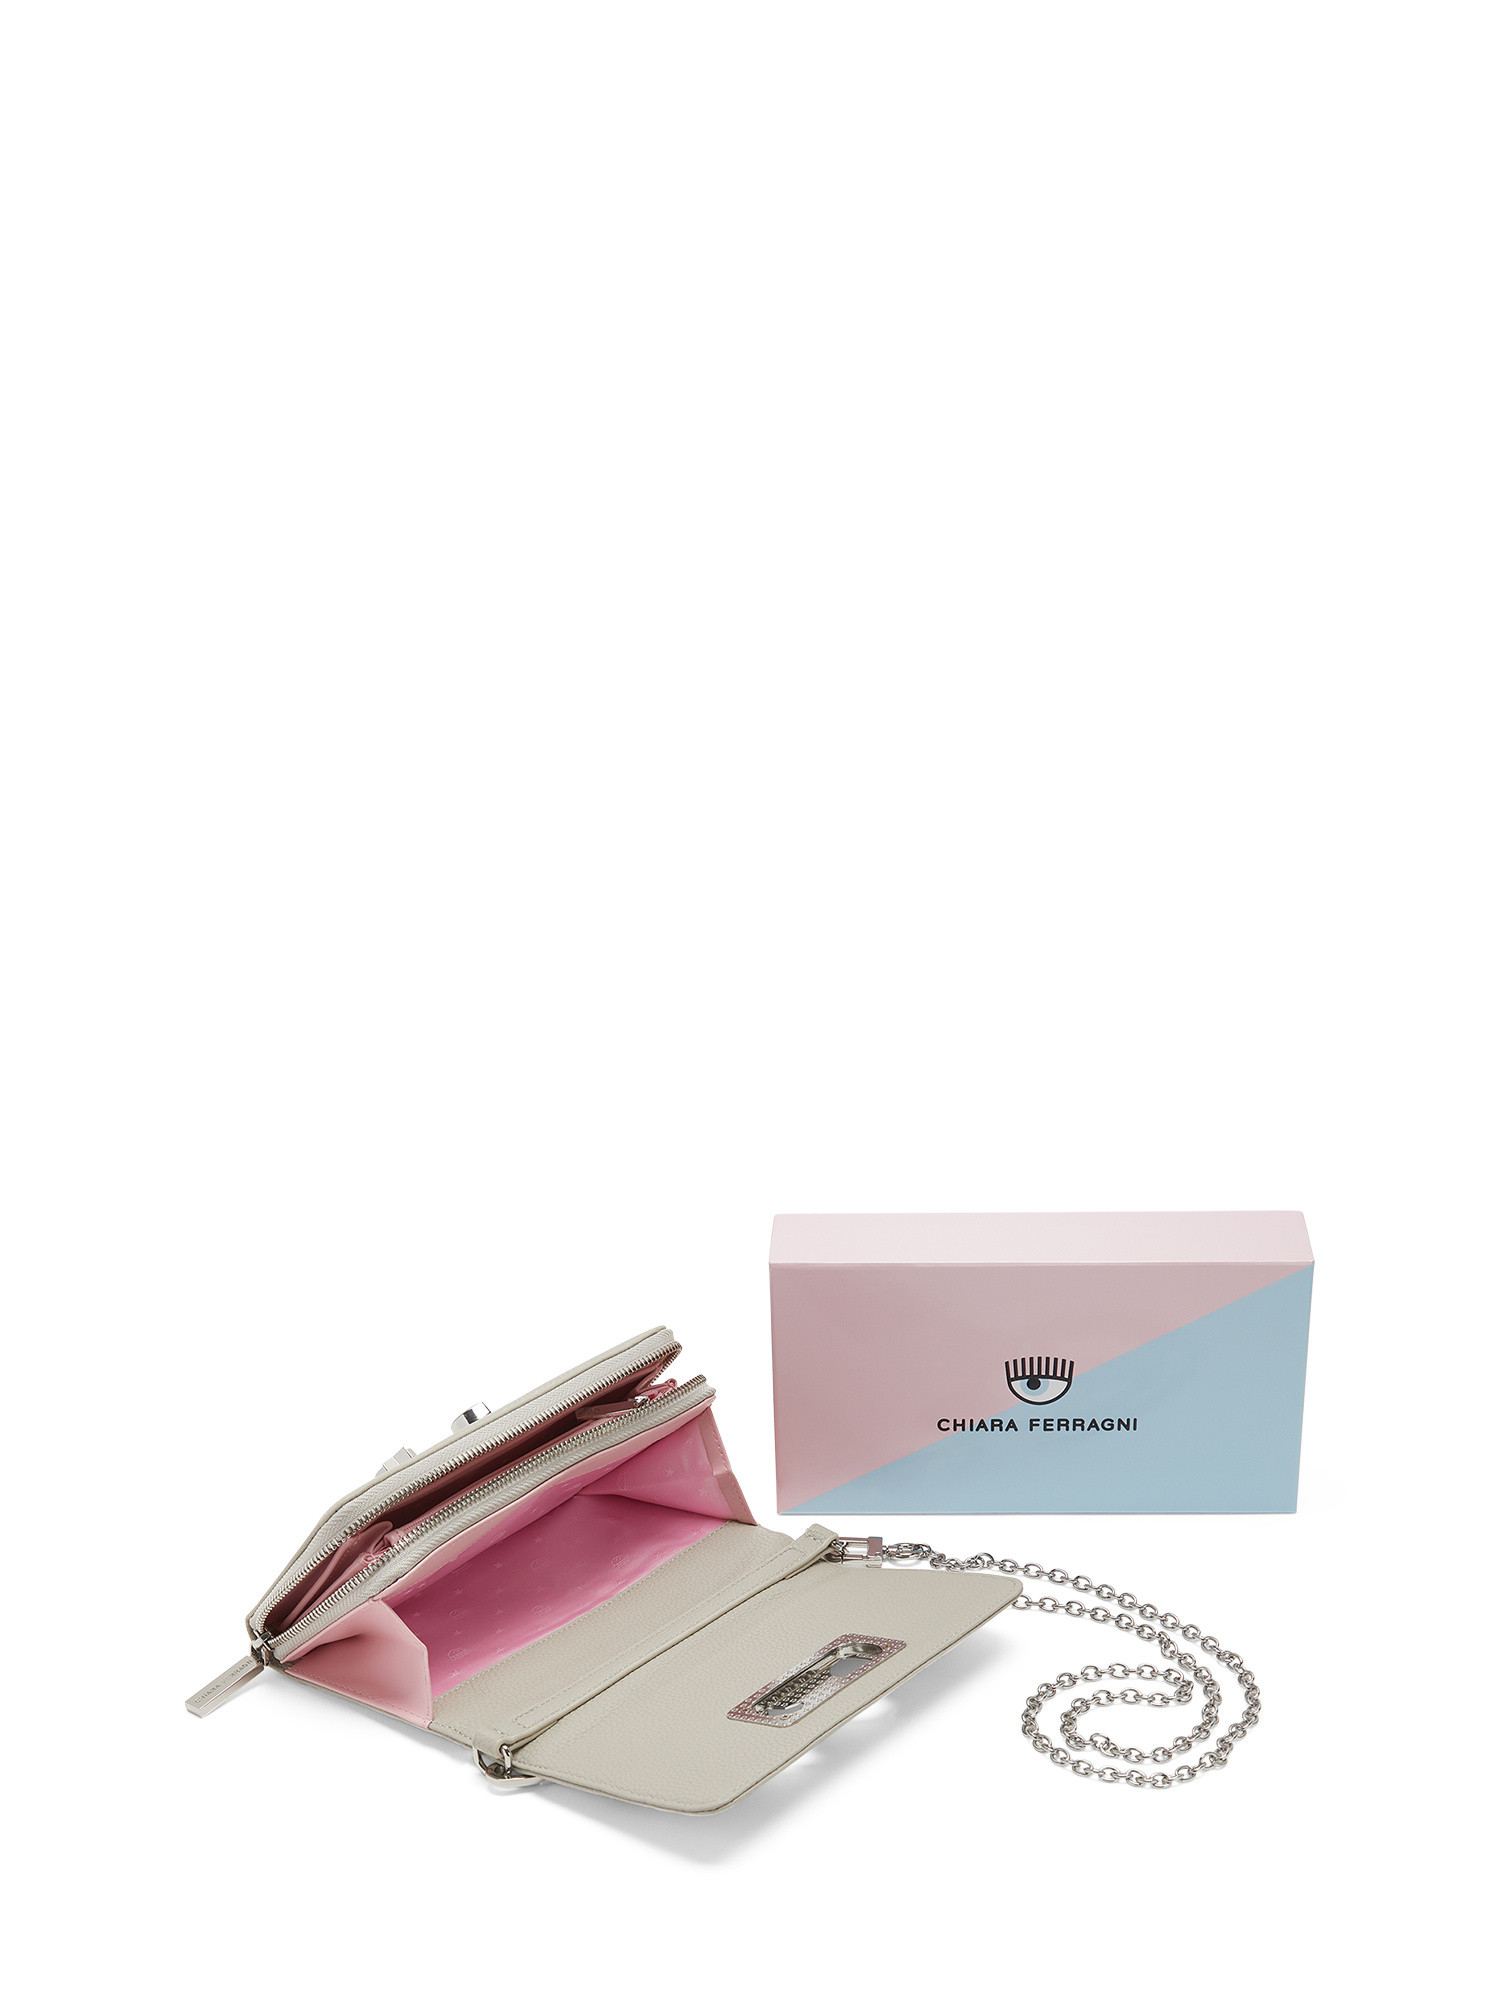 Chiara Ferragni - Clutch bag with logo, TAUPE, large image number 2